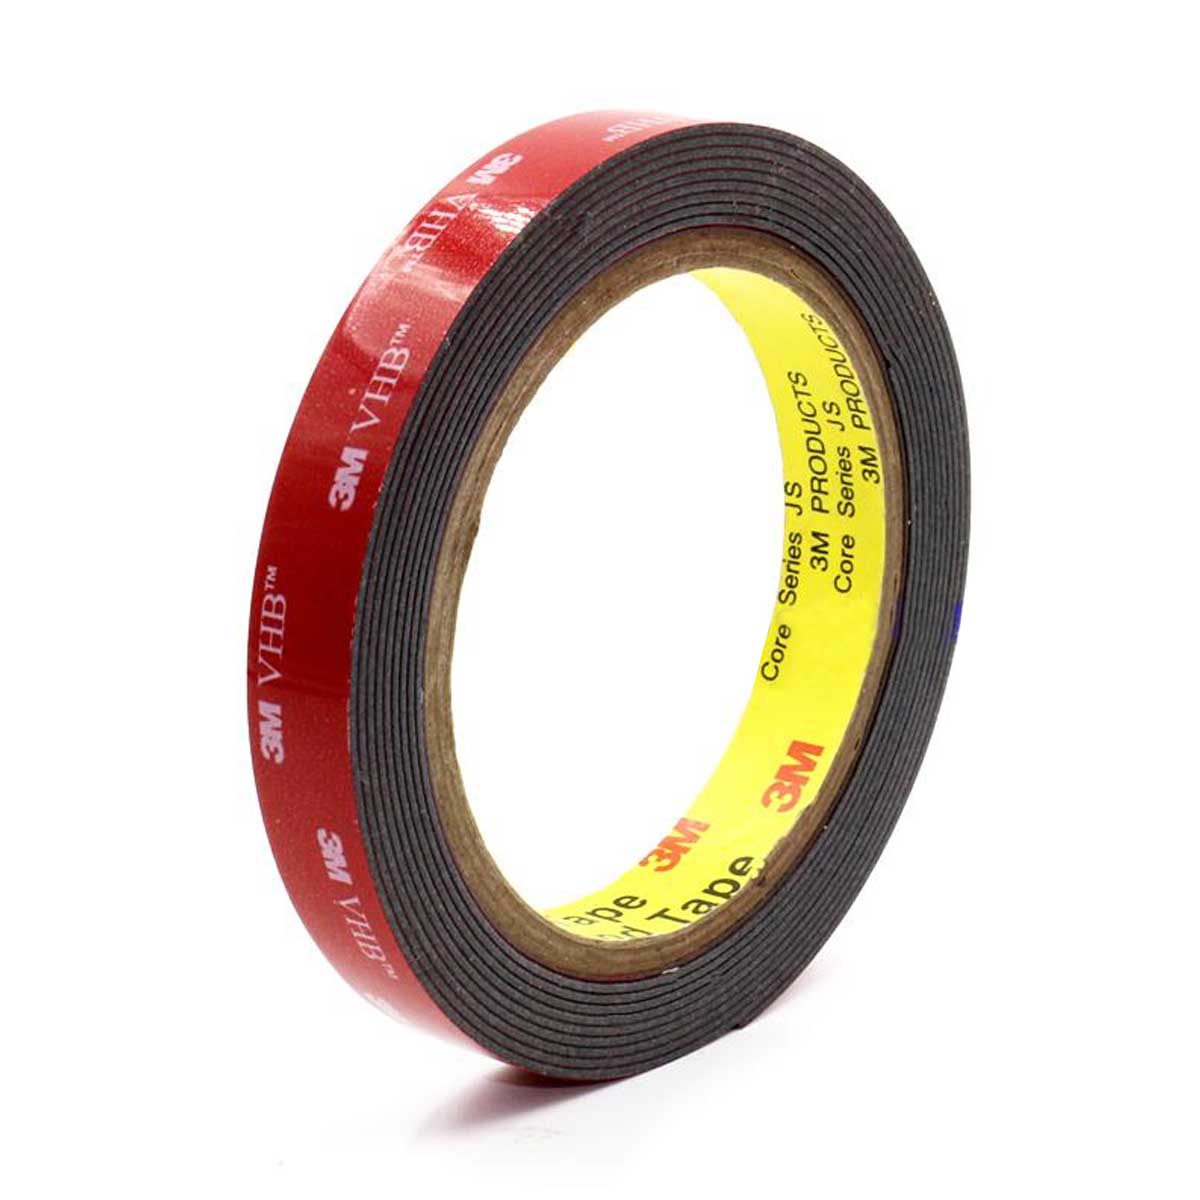 3M Double Sided VHB Tape 12mm x 3mtrs – Paintgard Protection Film